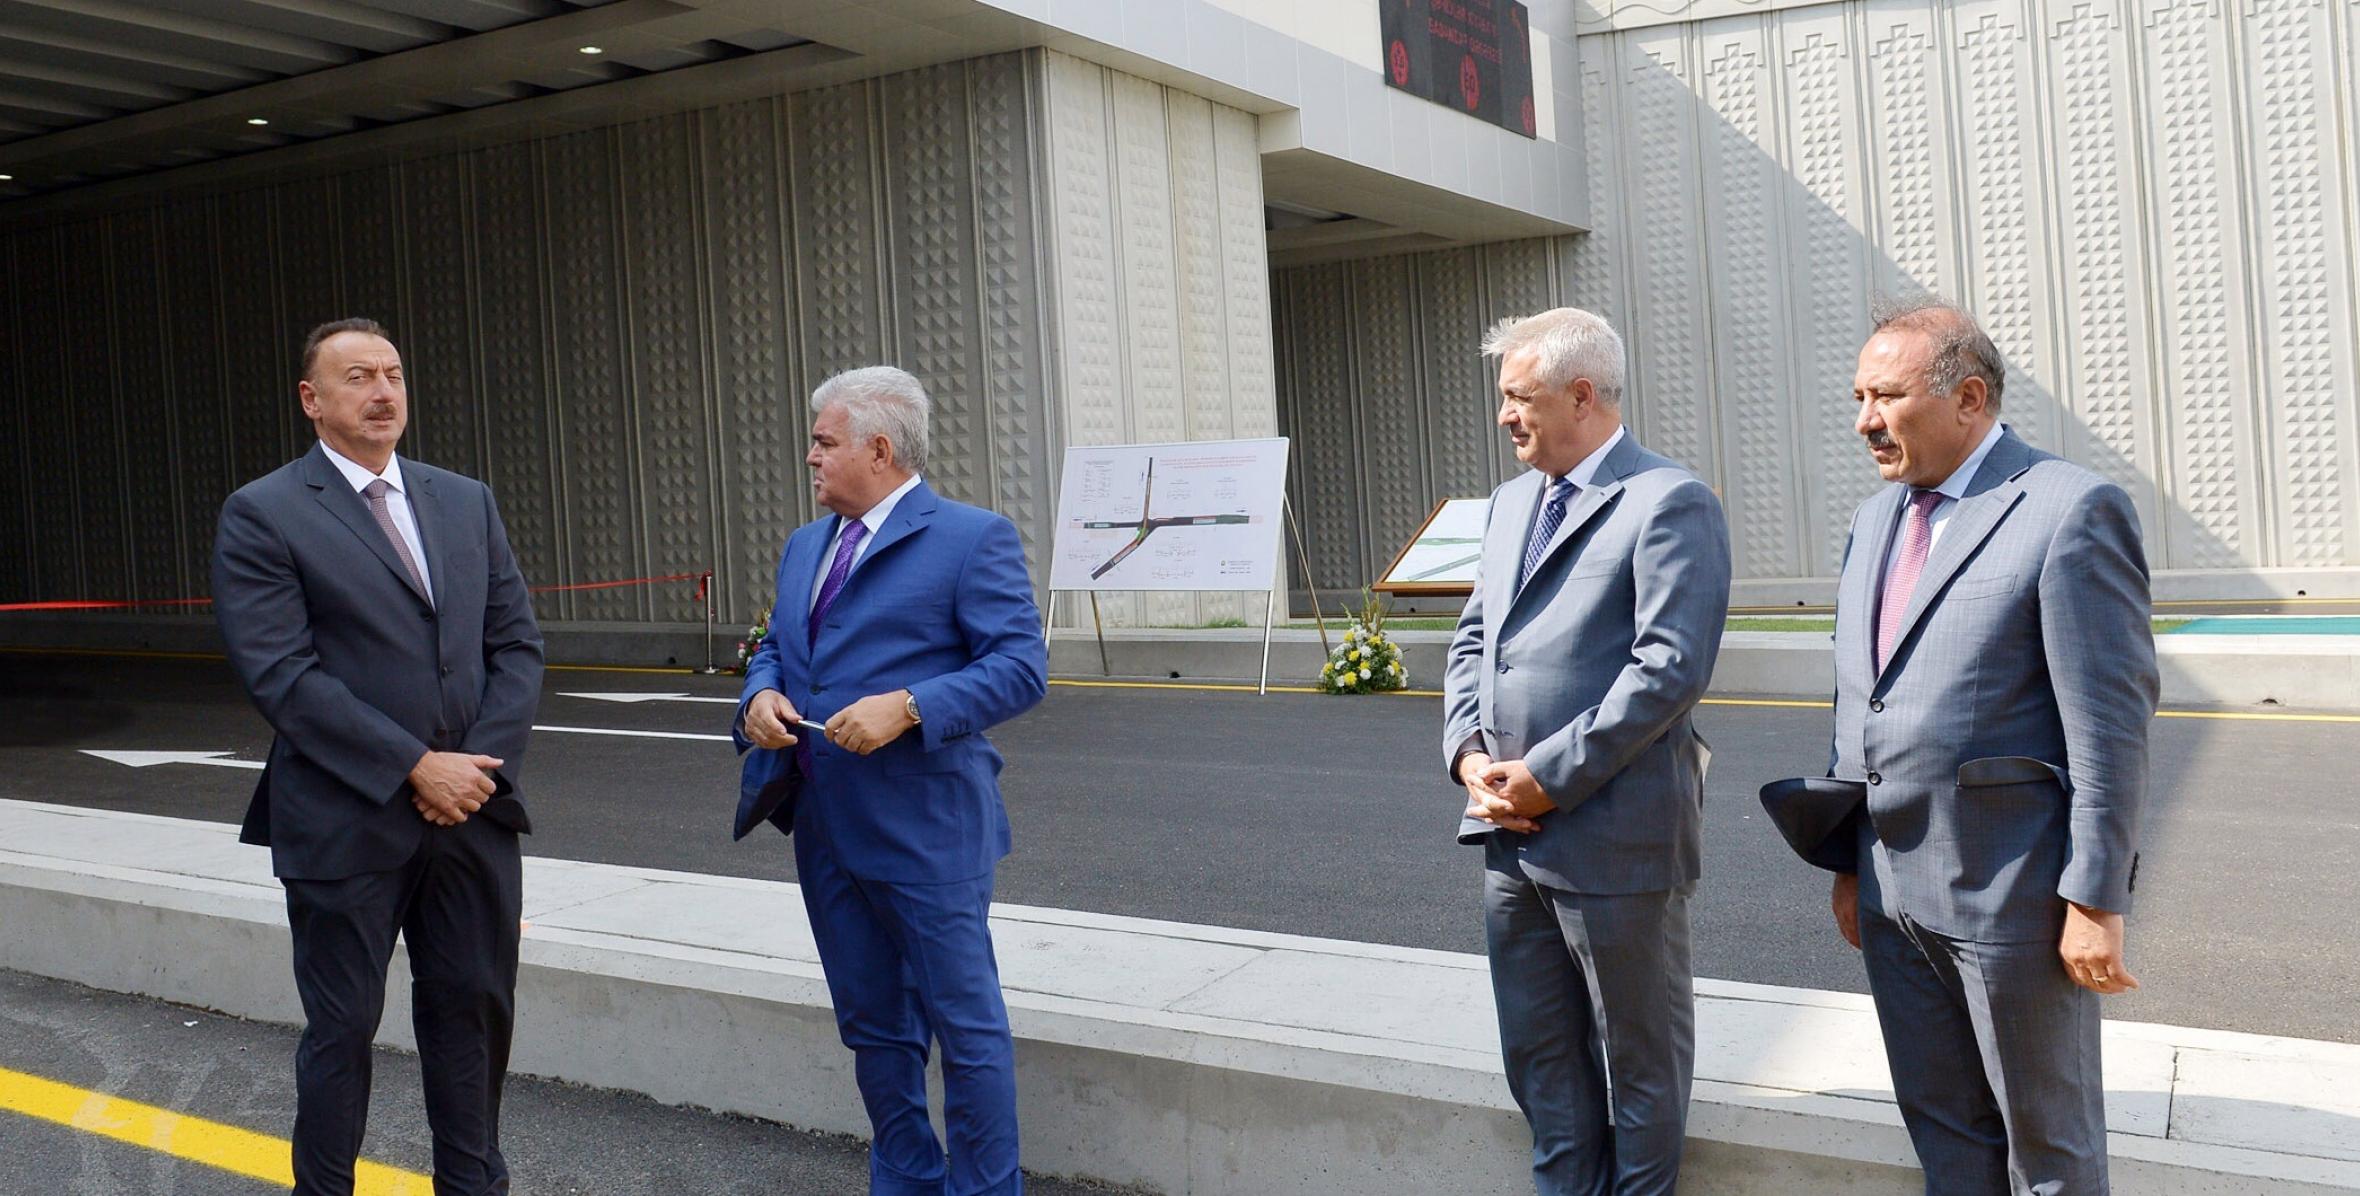 Ilham Aliyev attended the opening of another road junction in Baku